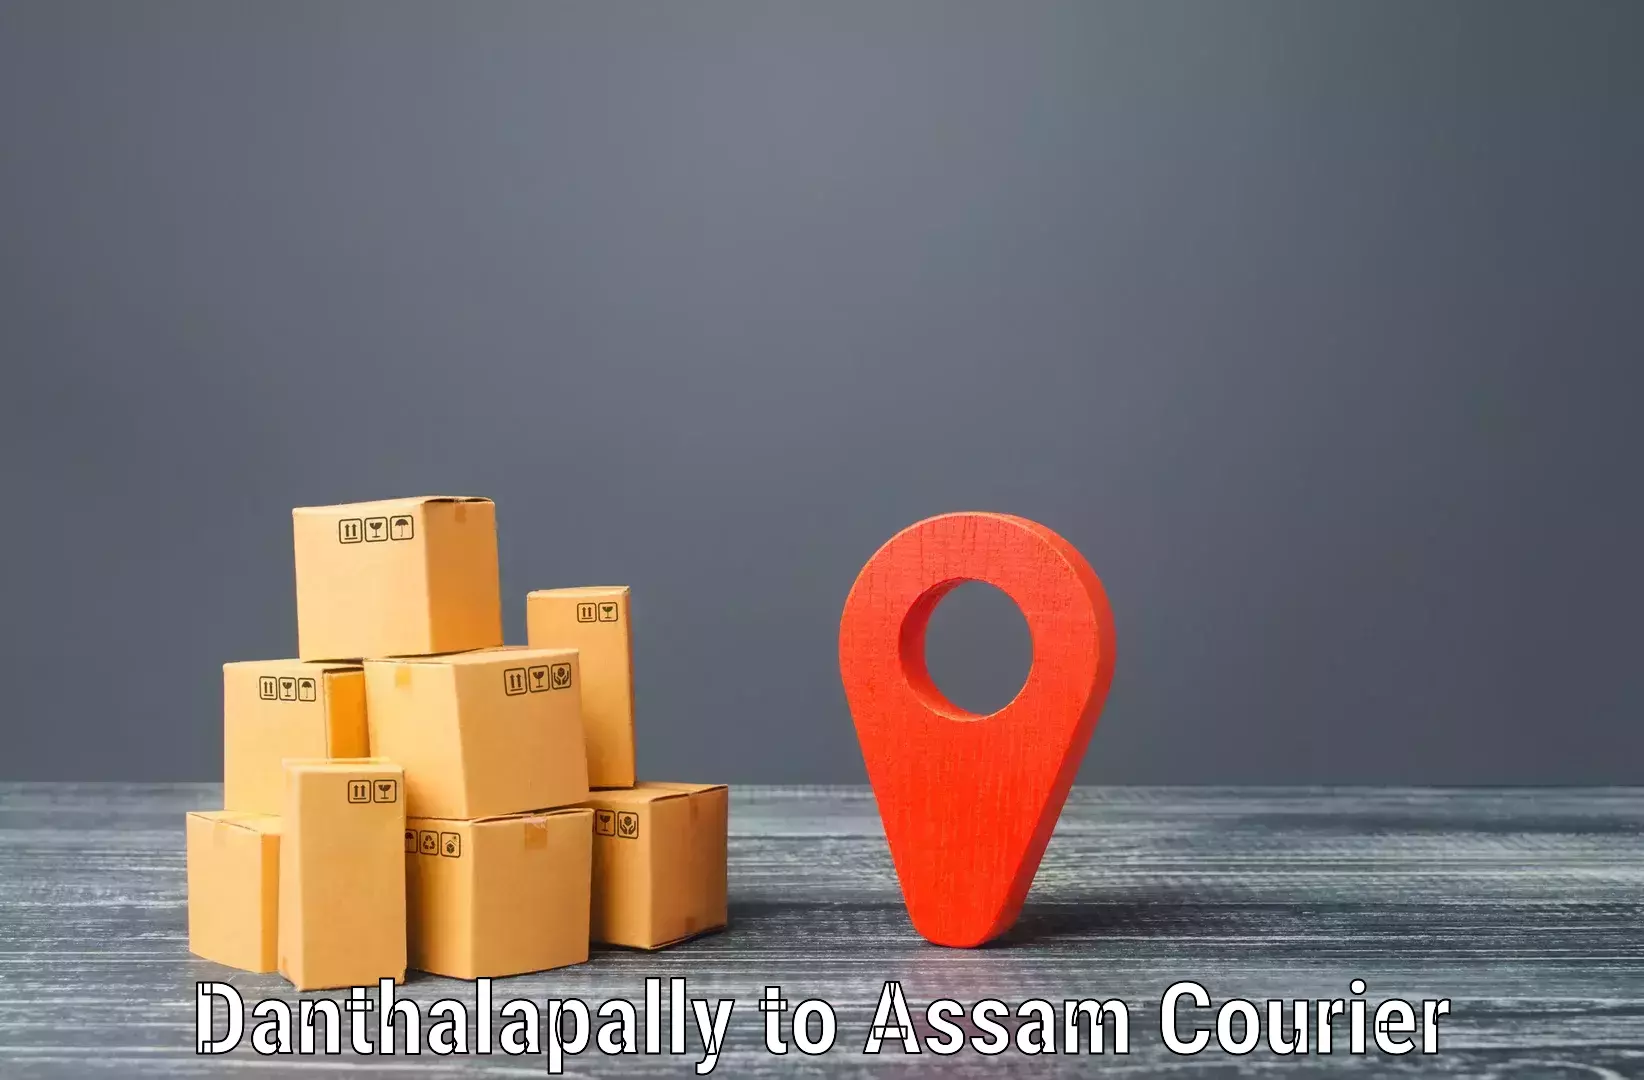 Tailored shipping services Danthalapally to Dibrugarh